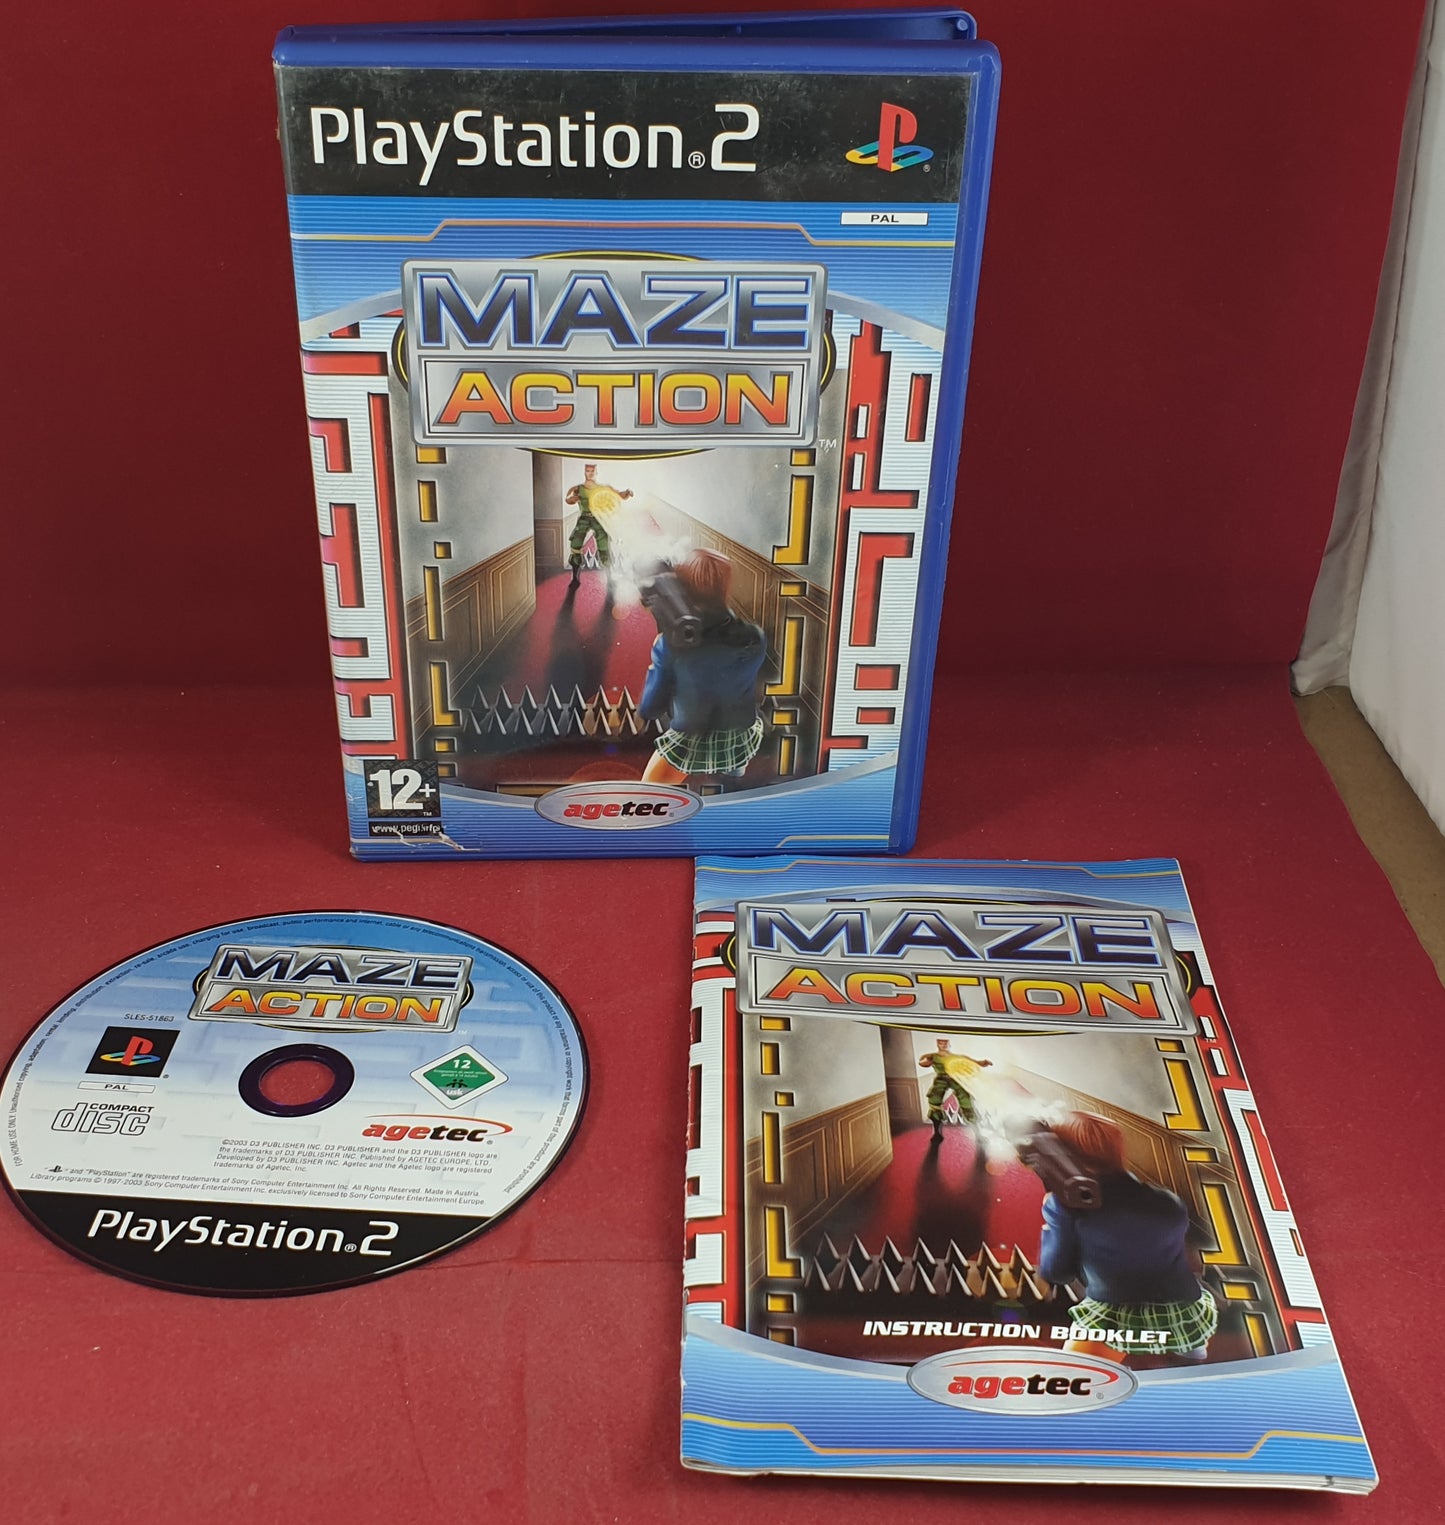 Maze Action Sony Playstation 2 (PS2) Game